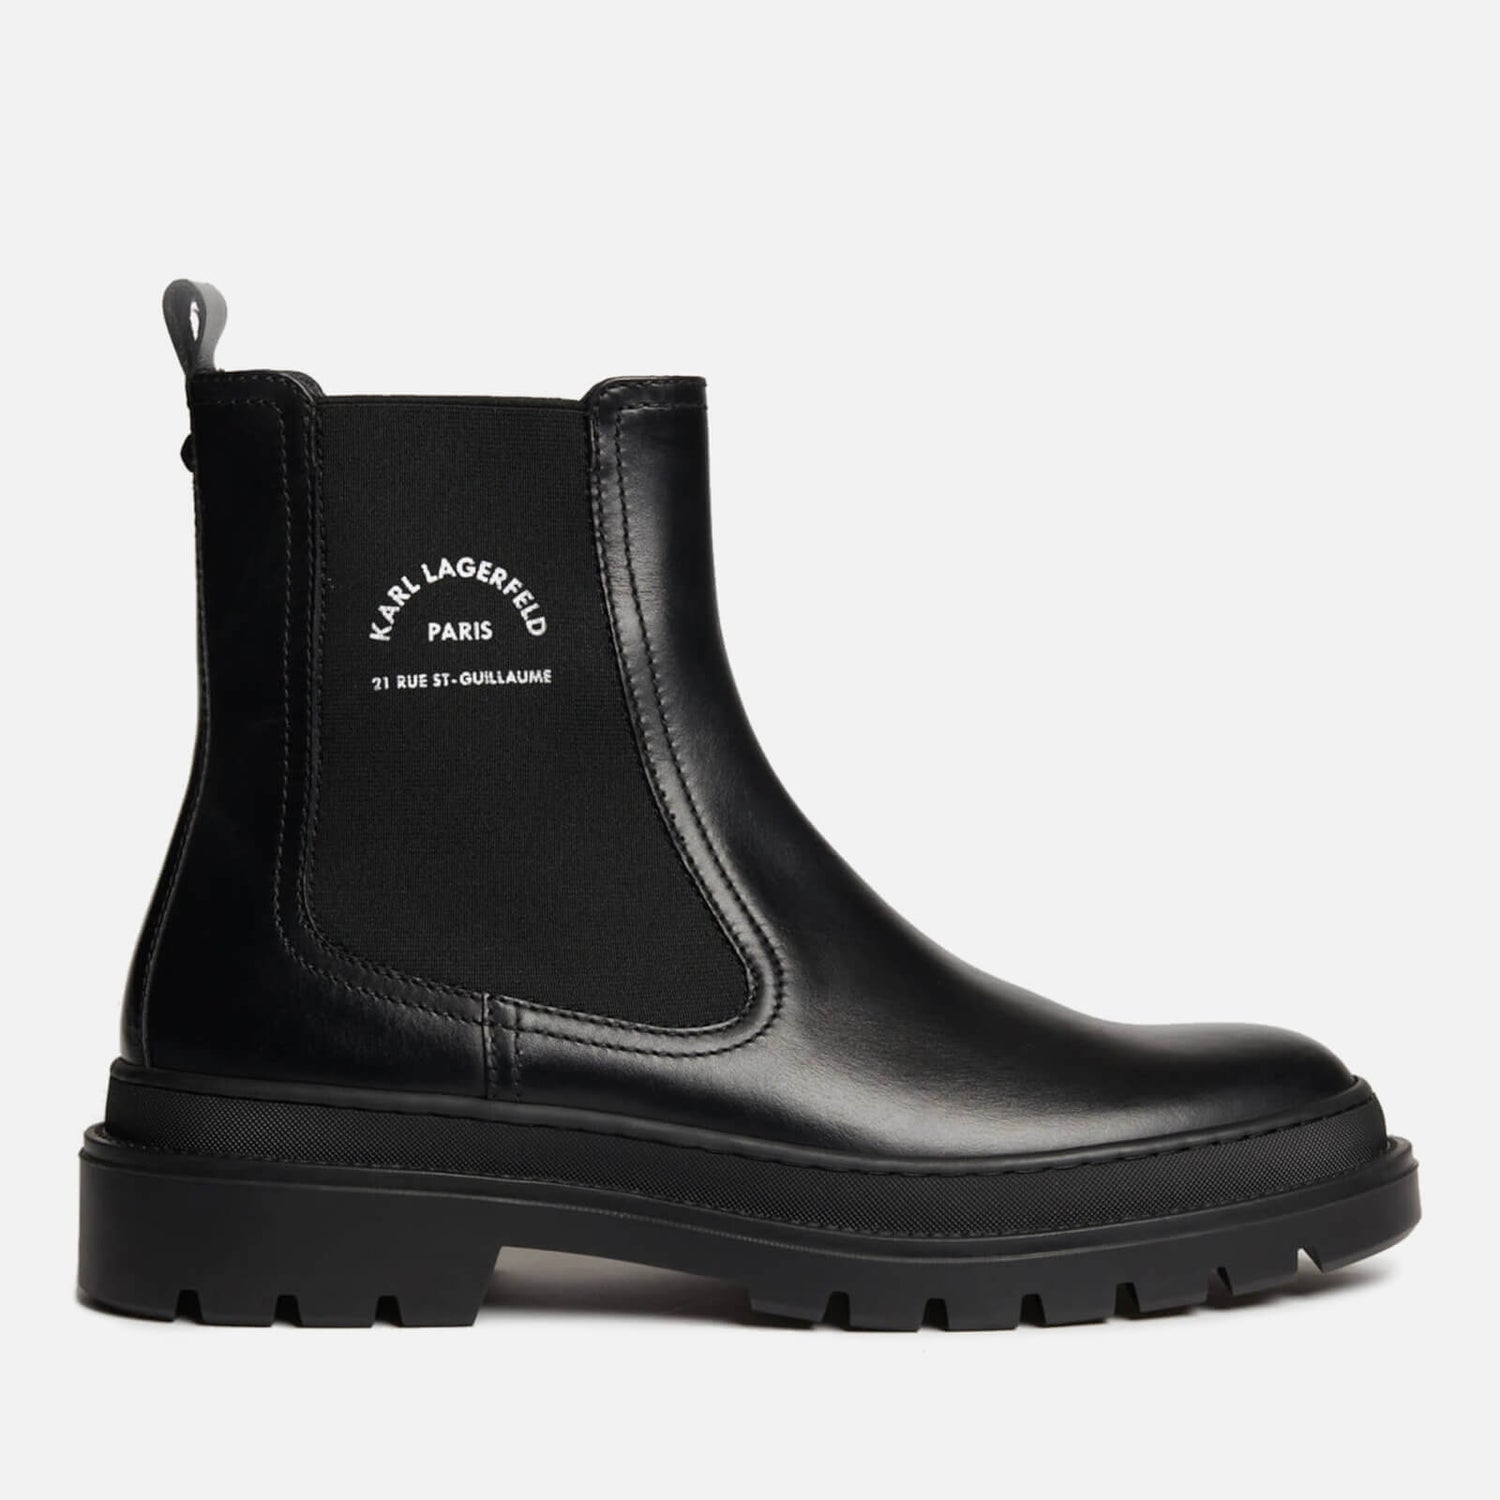 KARL LAGERFELD Outland Leather Chelsea Boots - UK 9